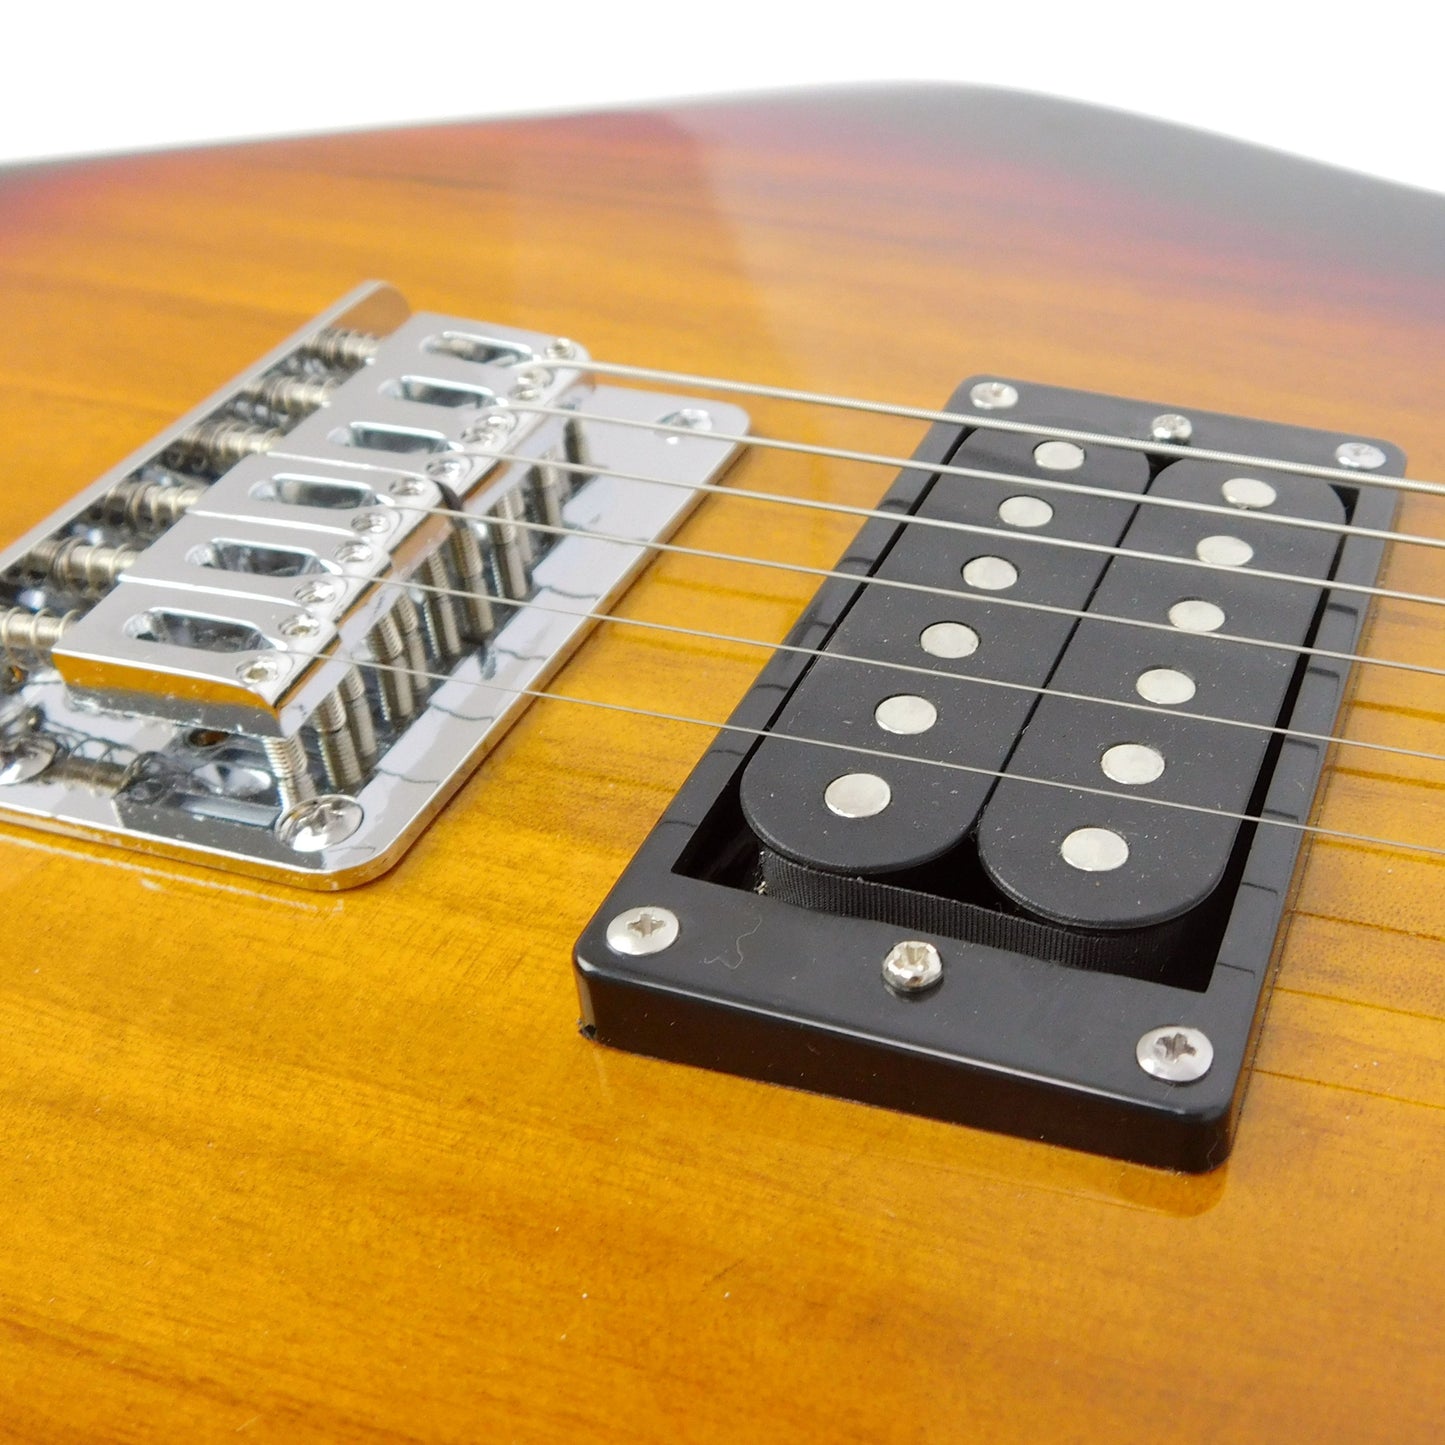 Haze HST Electric Guitar - Vintageburst, Available in 4/4 and 3/4 Sizes